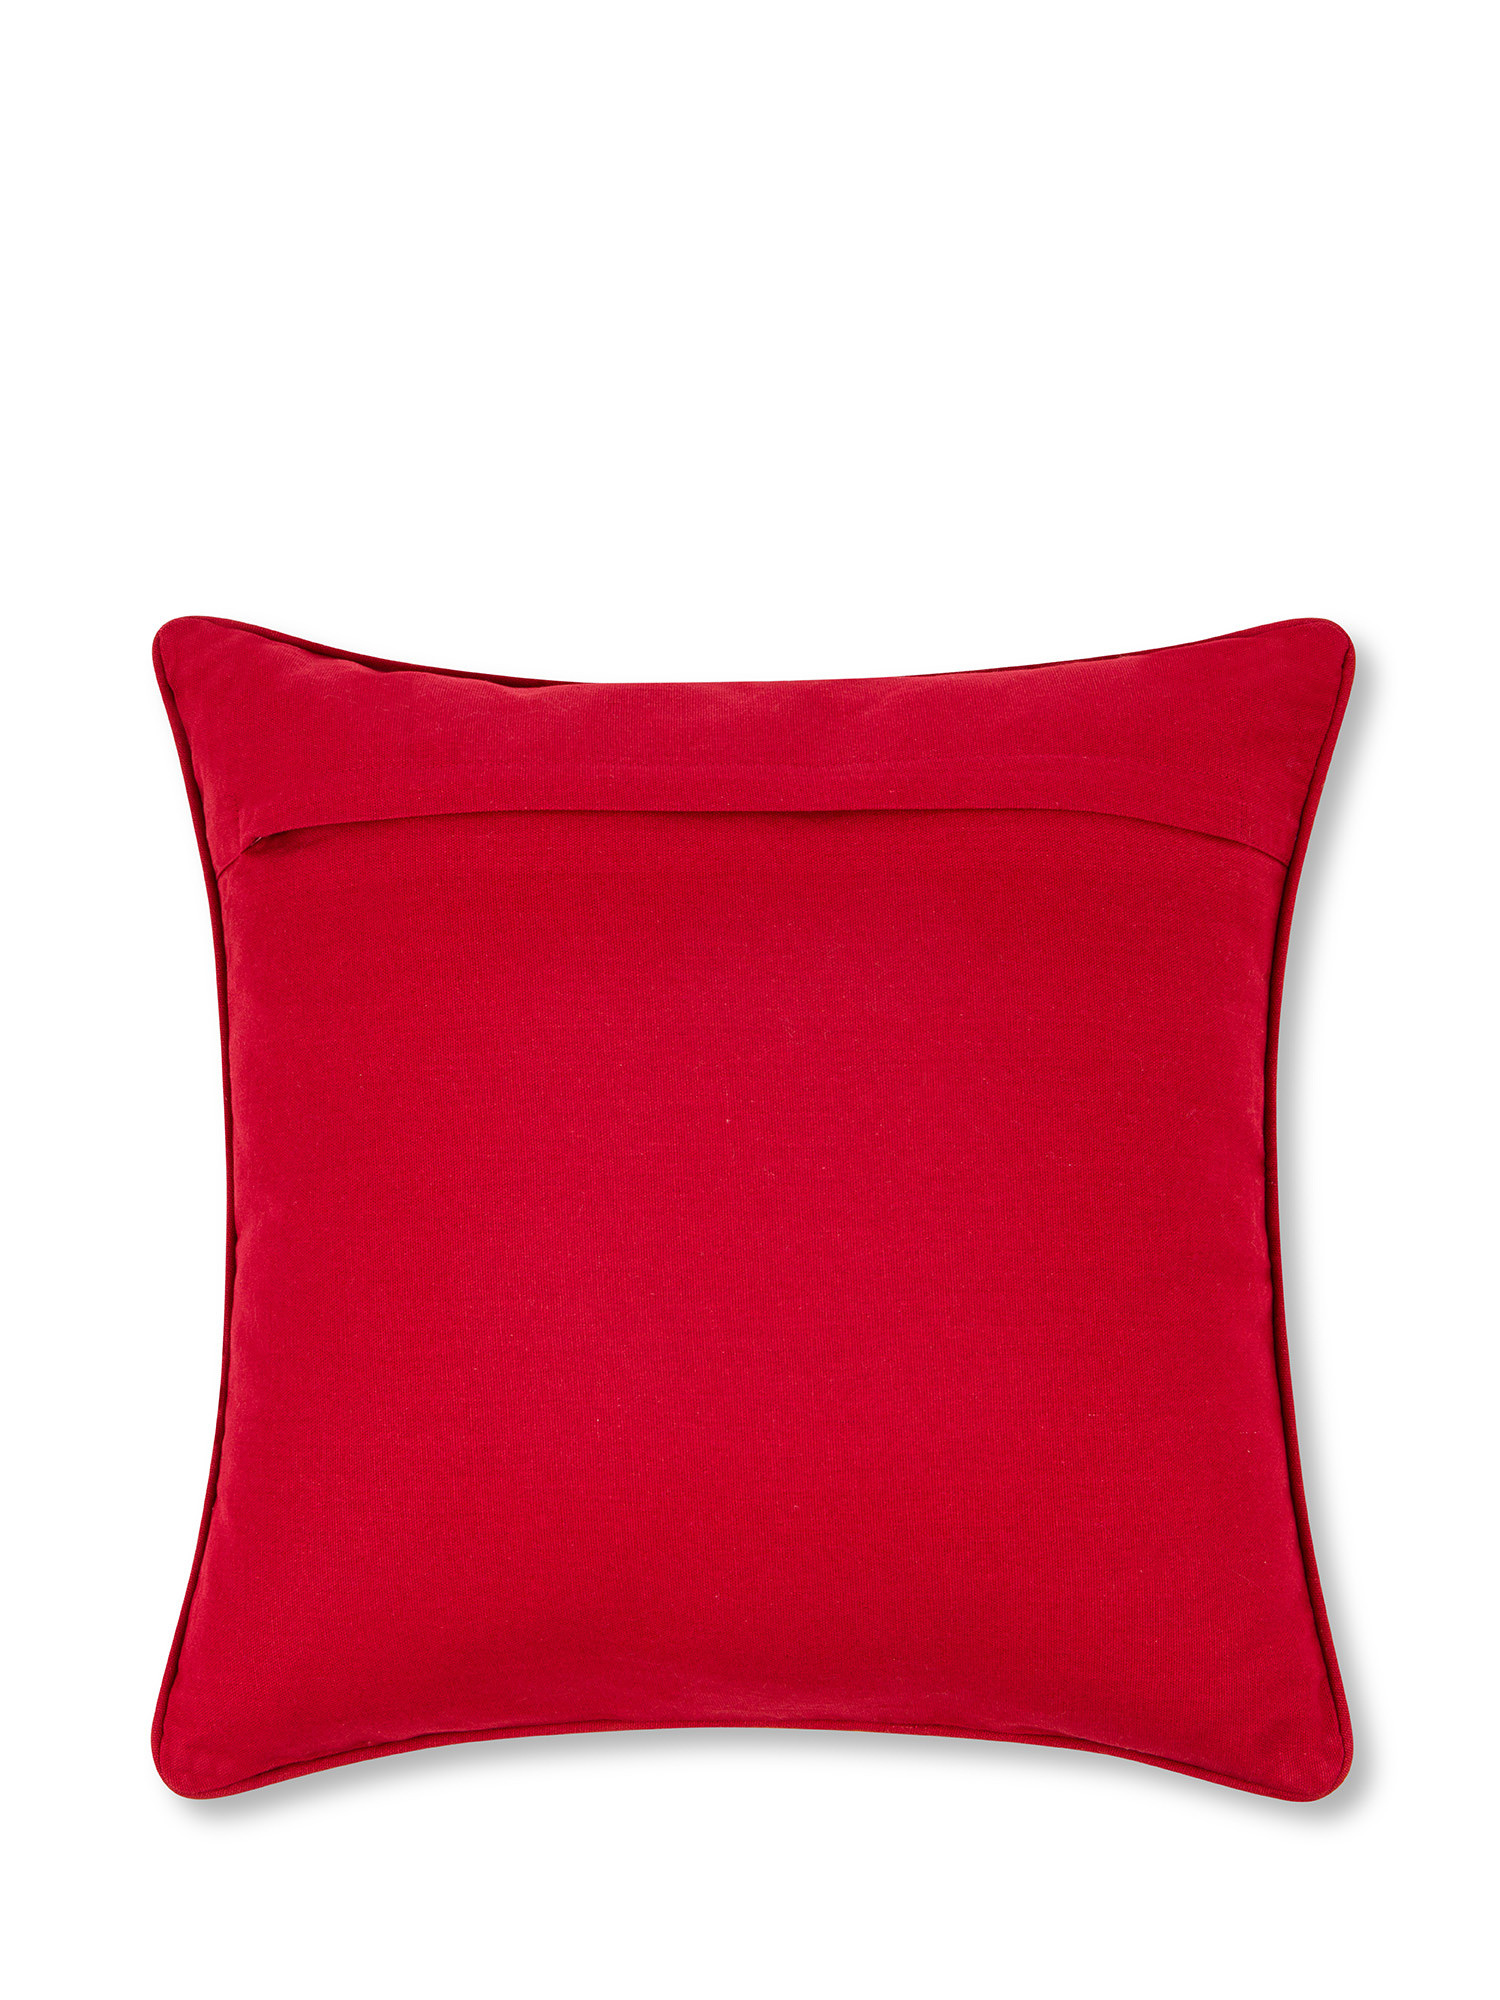 Embroidered tartan fabric cushion 45x45cm, Red, large image number 2